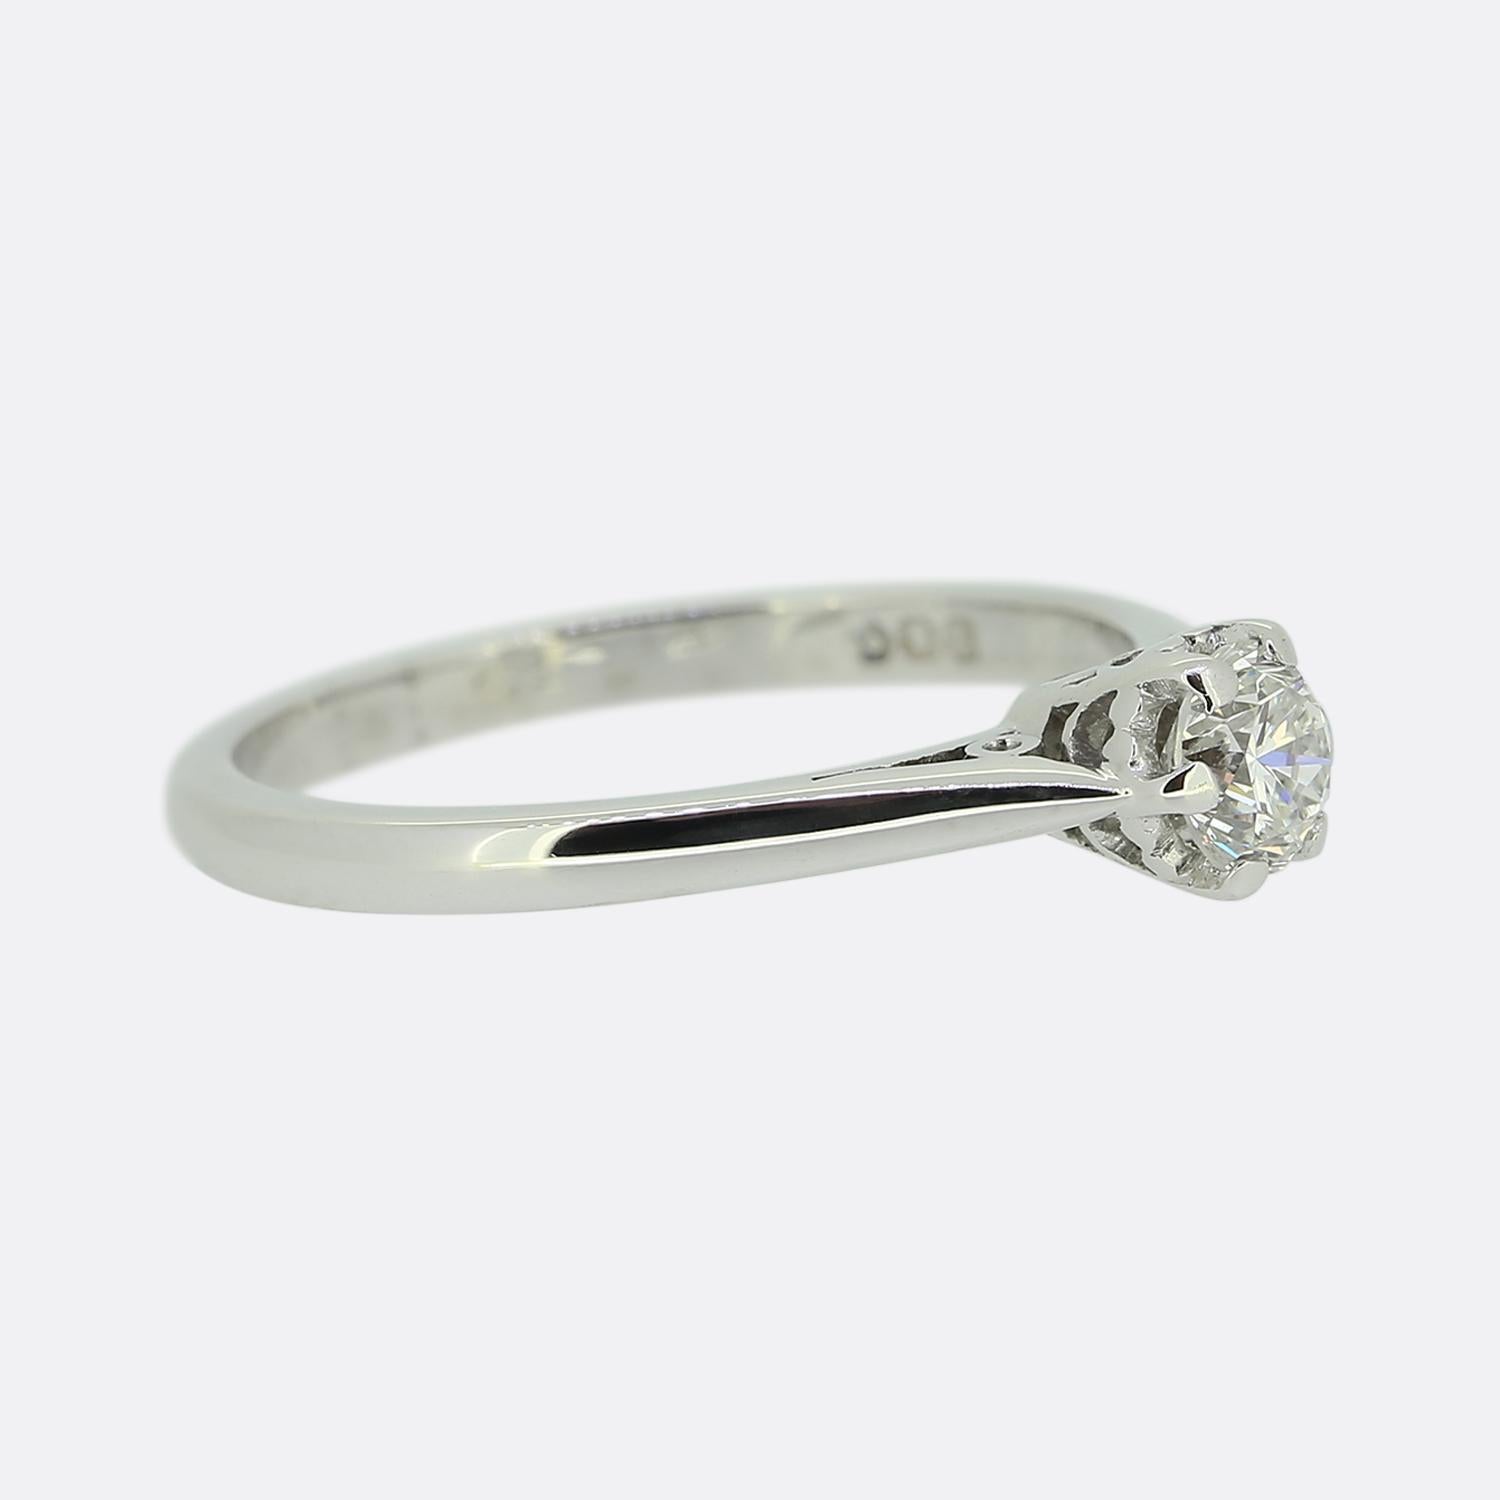 Boodles 0.41 Carat Diamond Solitaire Engagement Ring In Excellent Condition For Sale In London, GB